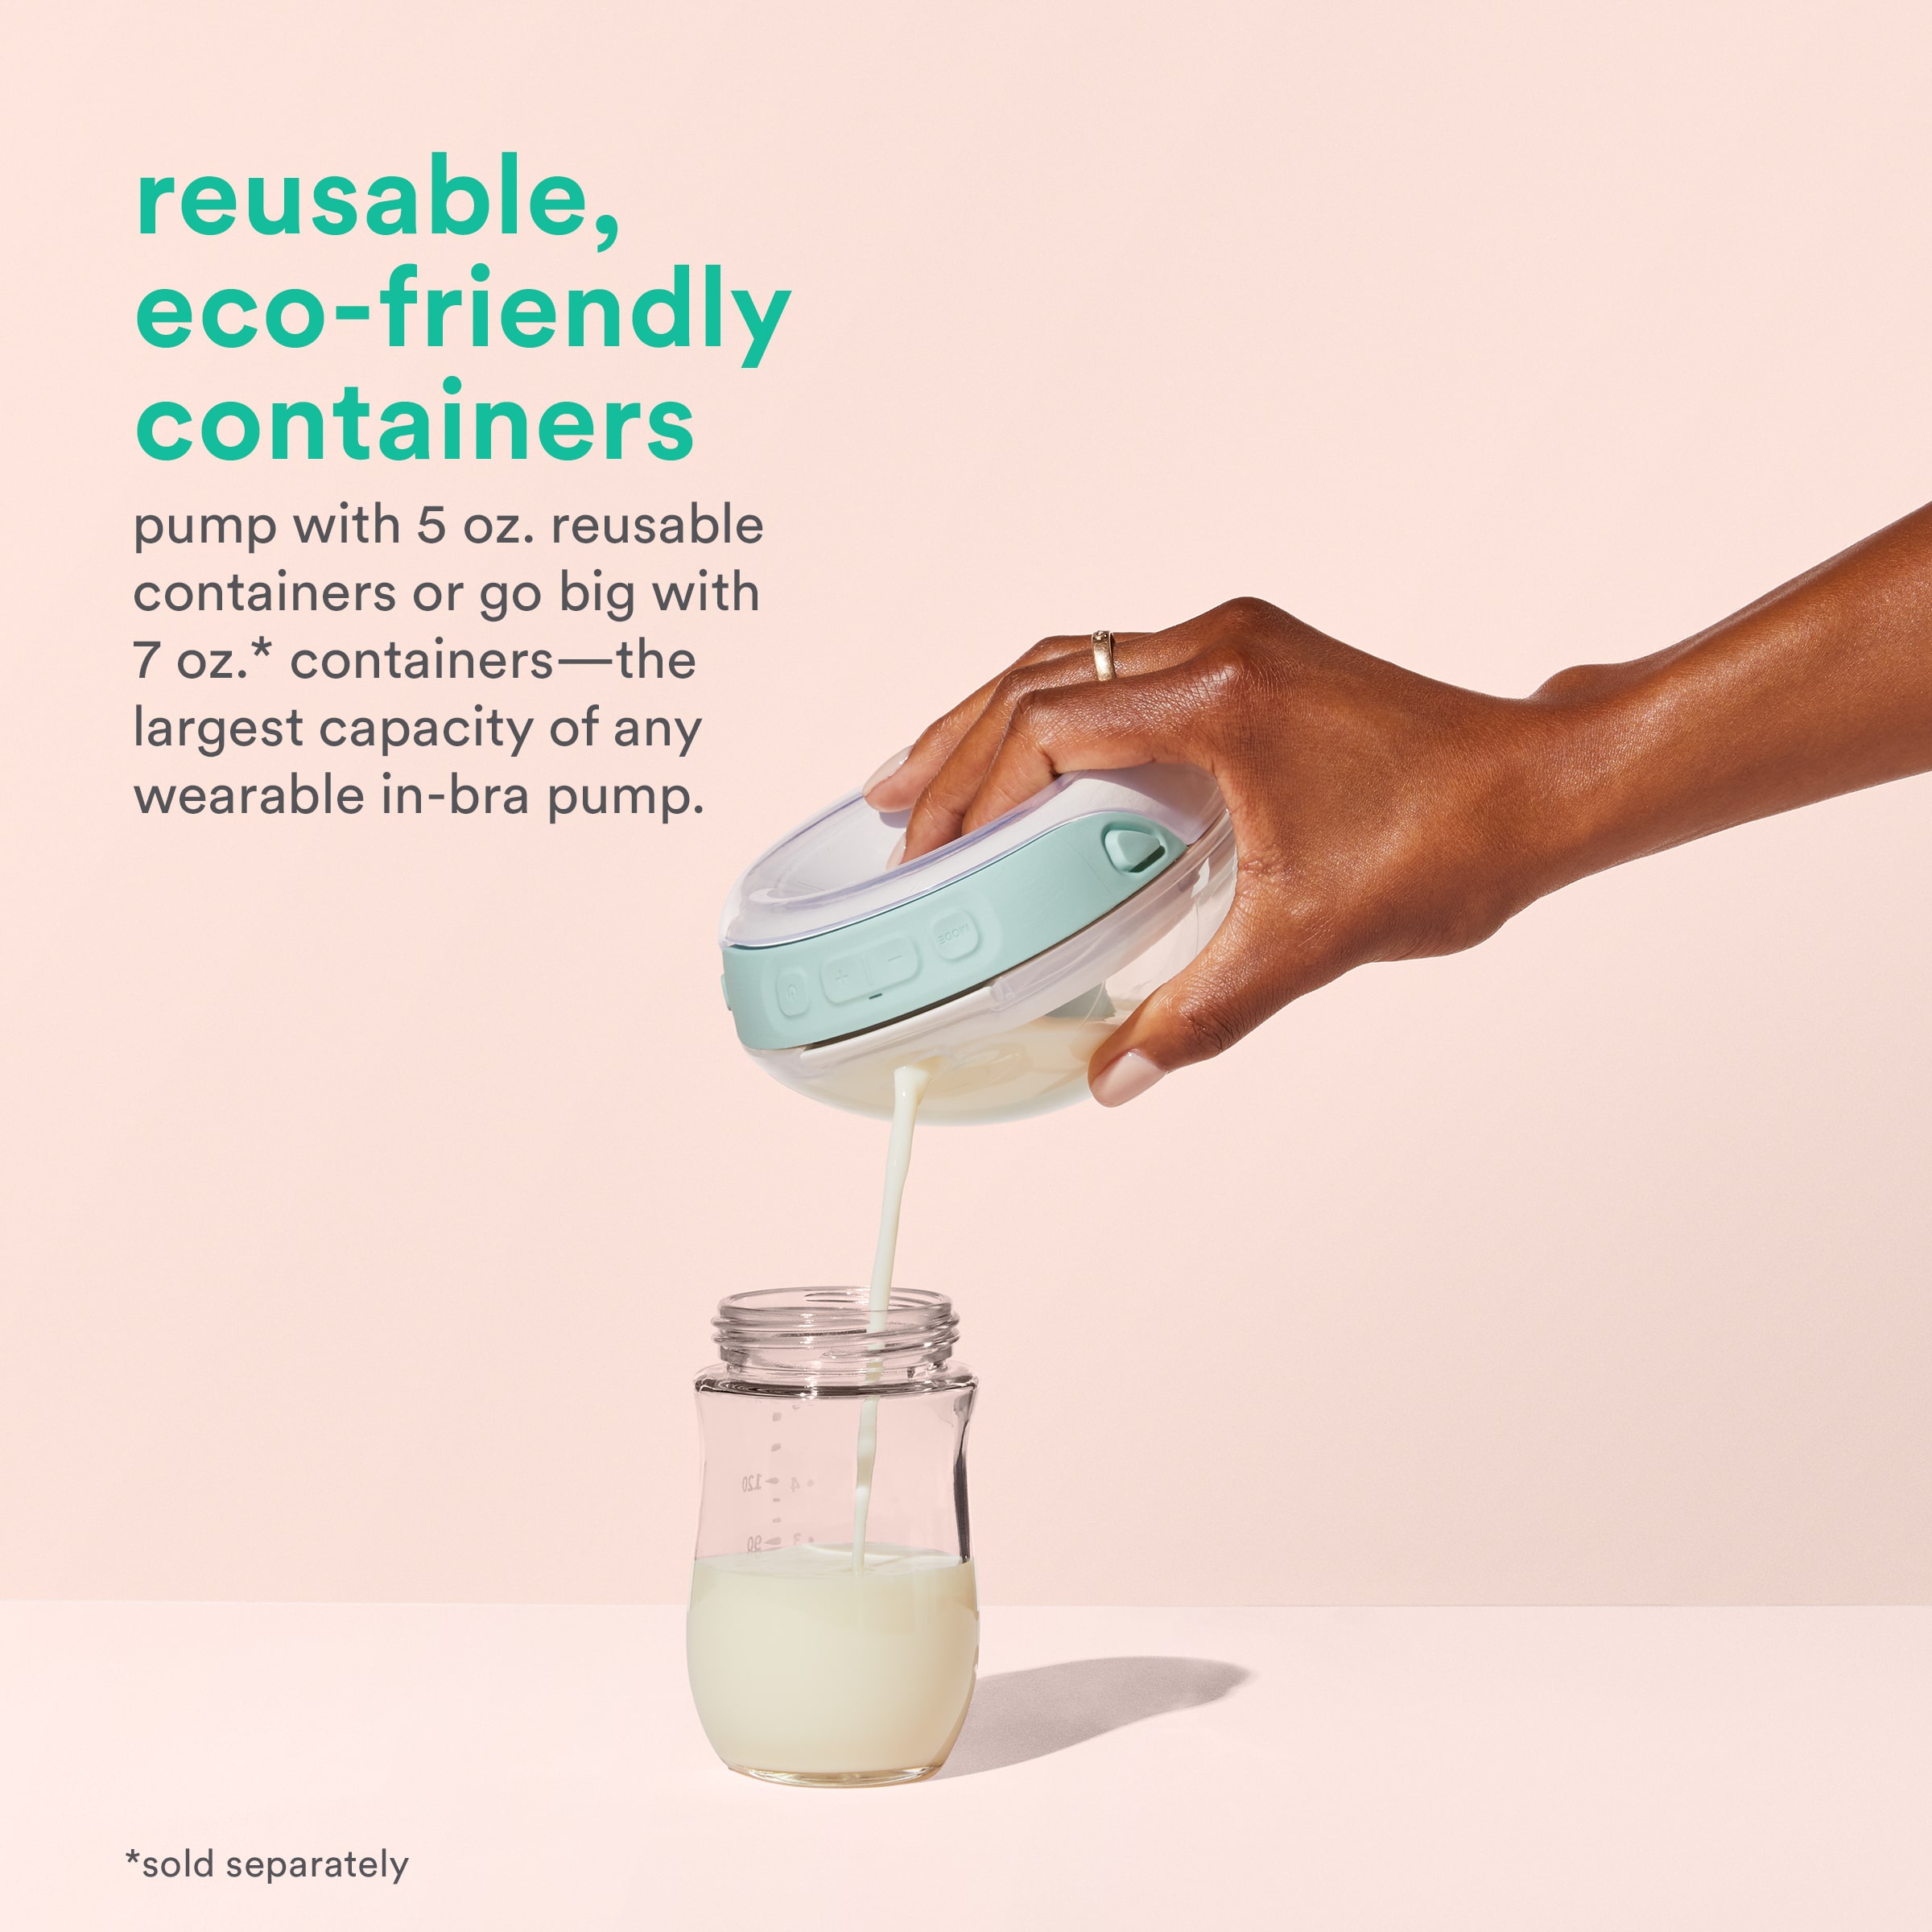 Willow Go™ Wearable Breast Pump